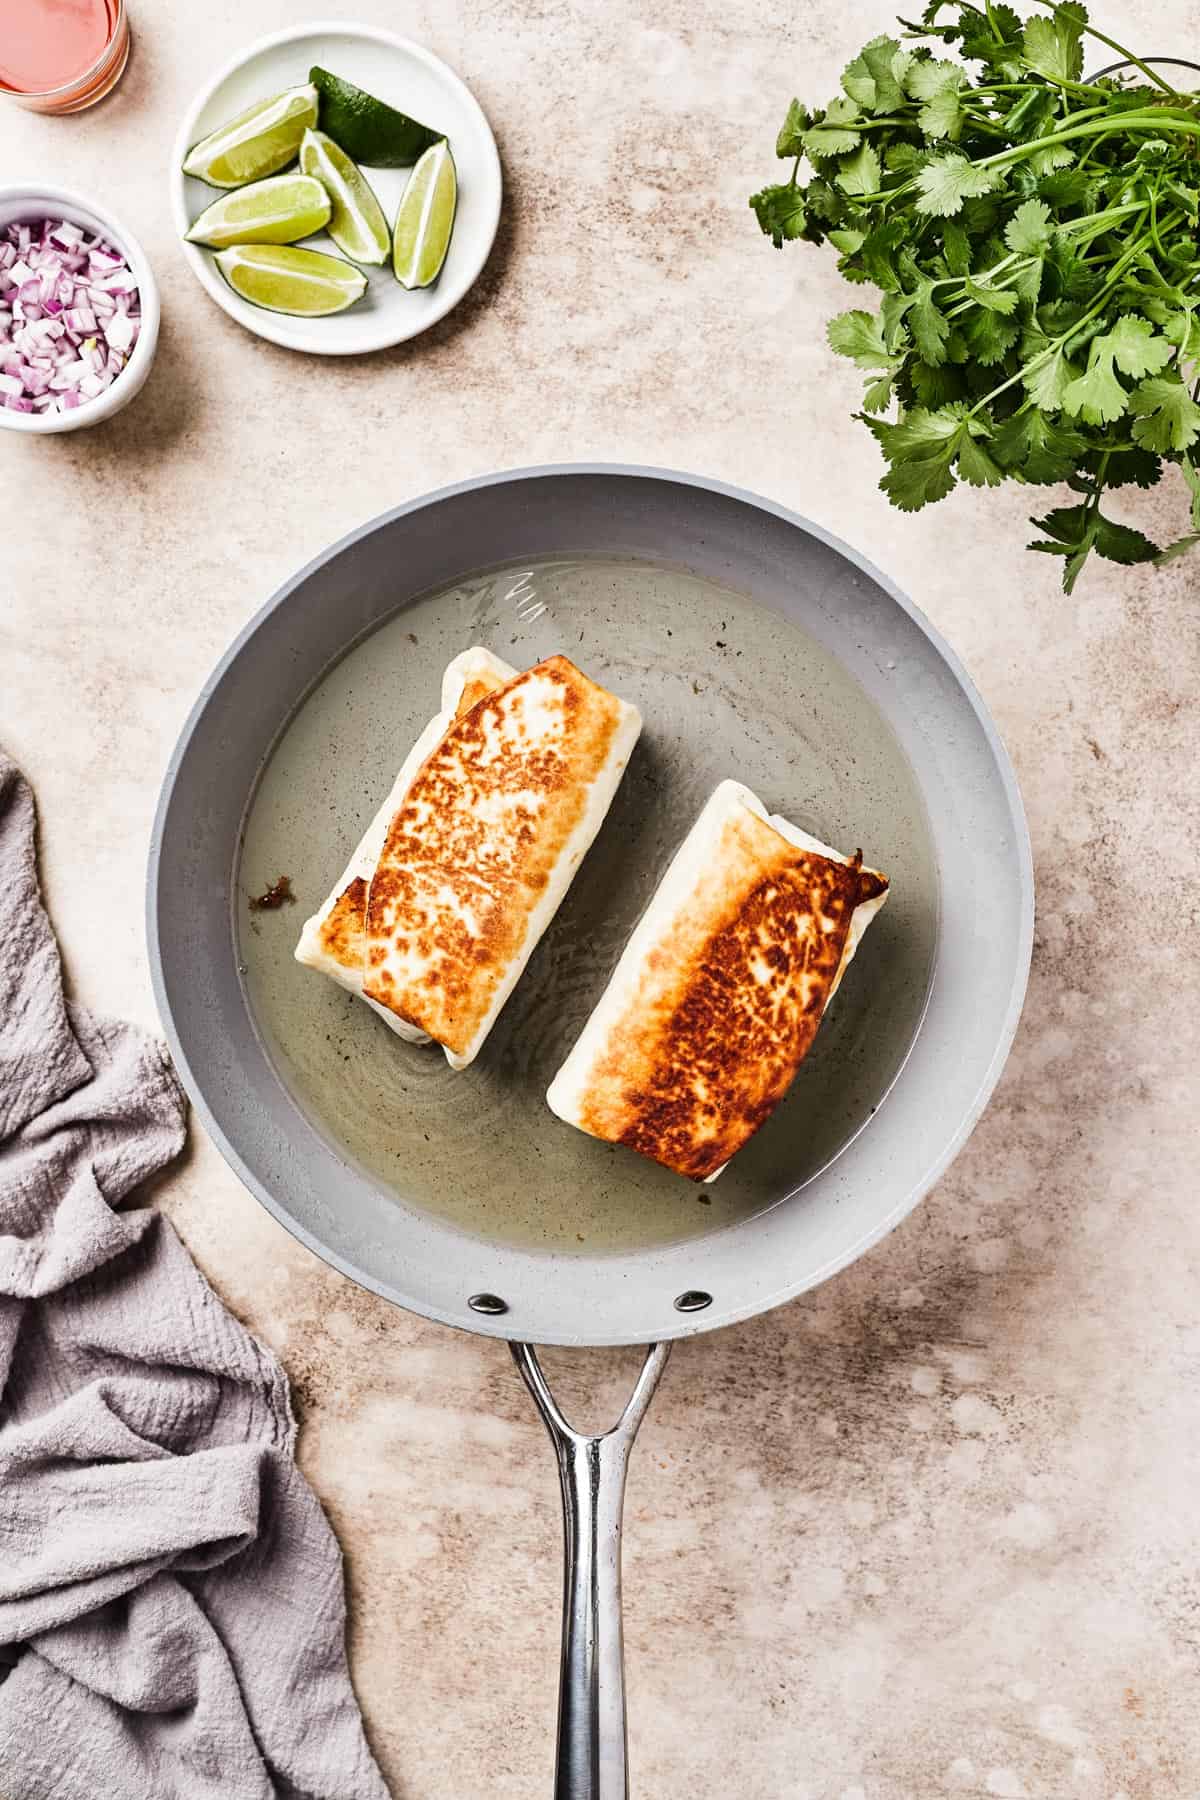 Fried burritos in a skillet with oil.